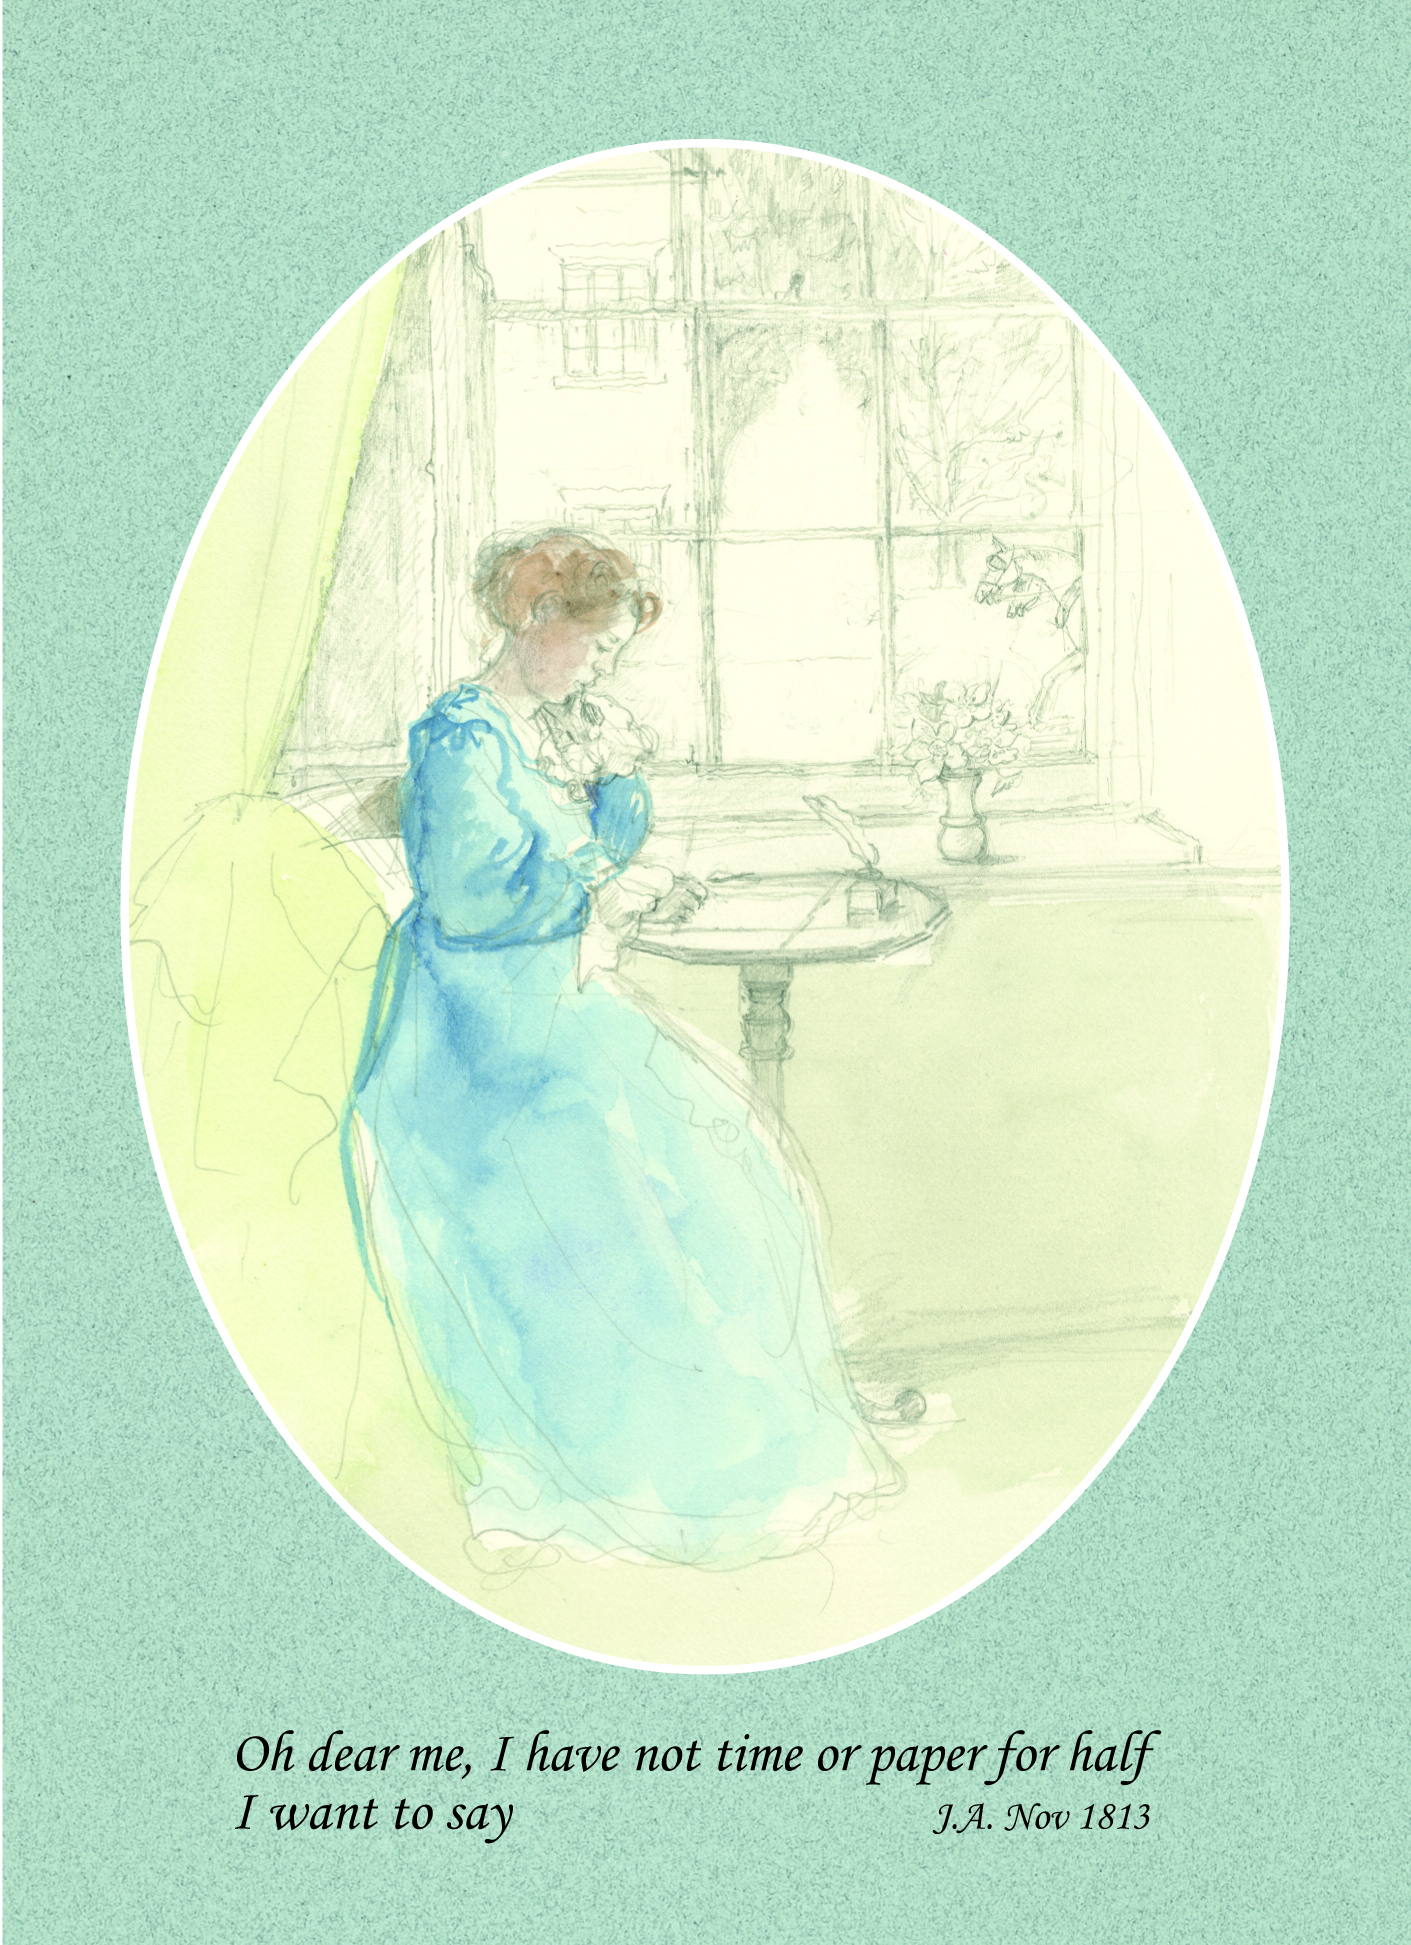 Oh dear me, I have not time or paper for half I want to say - Jane Austen card on sale at Winchester Cathedral gift shop.